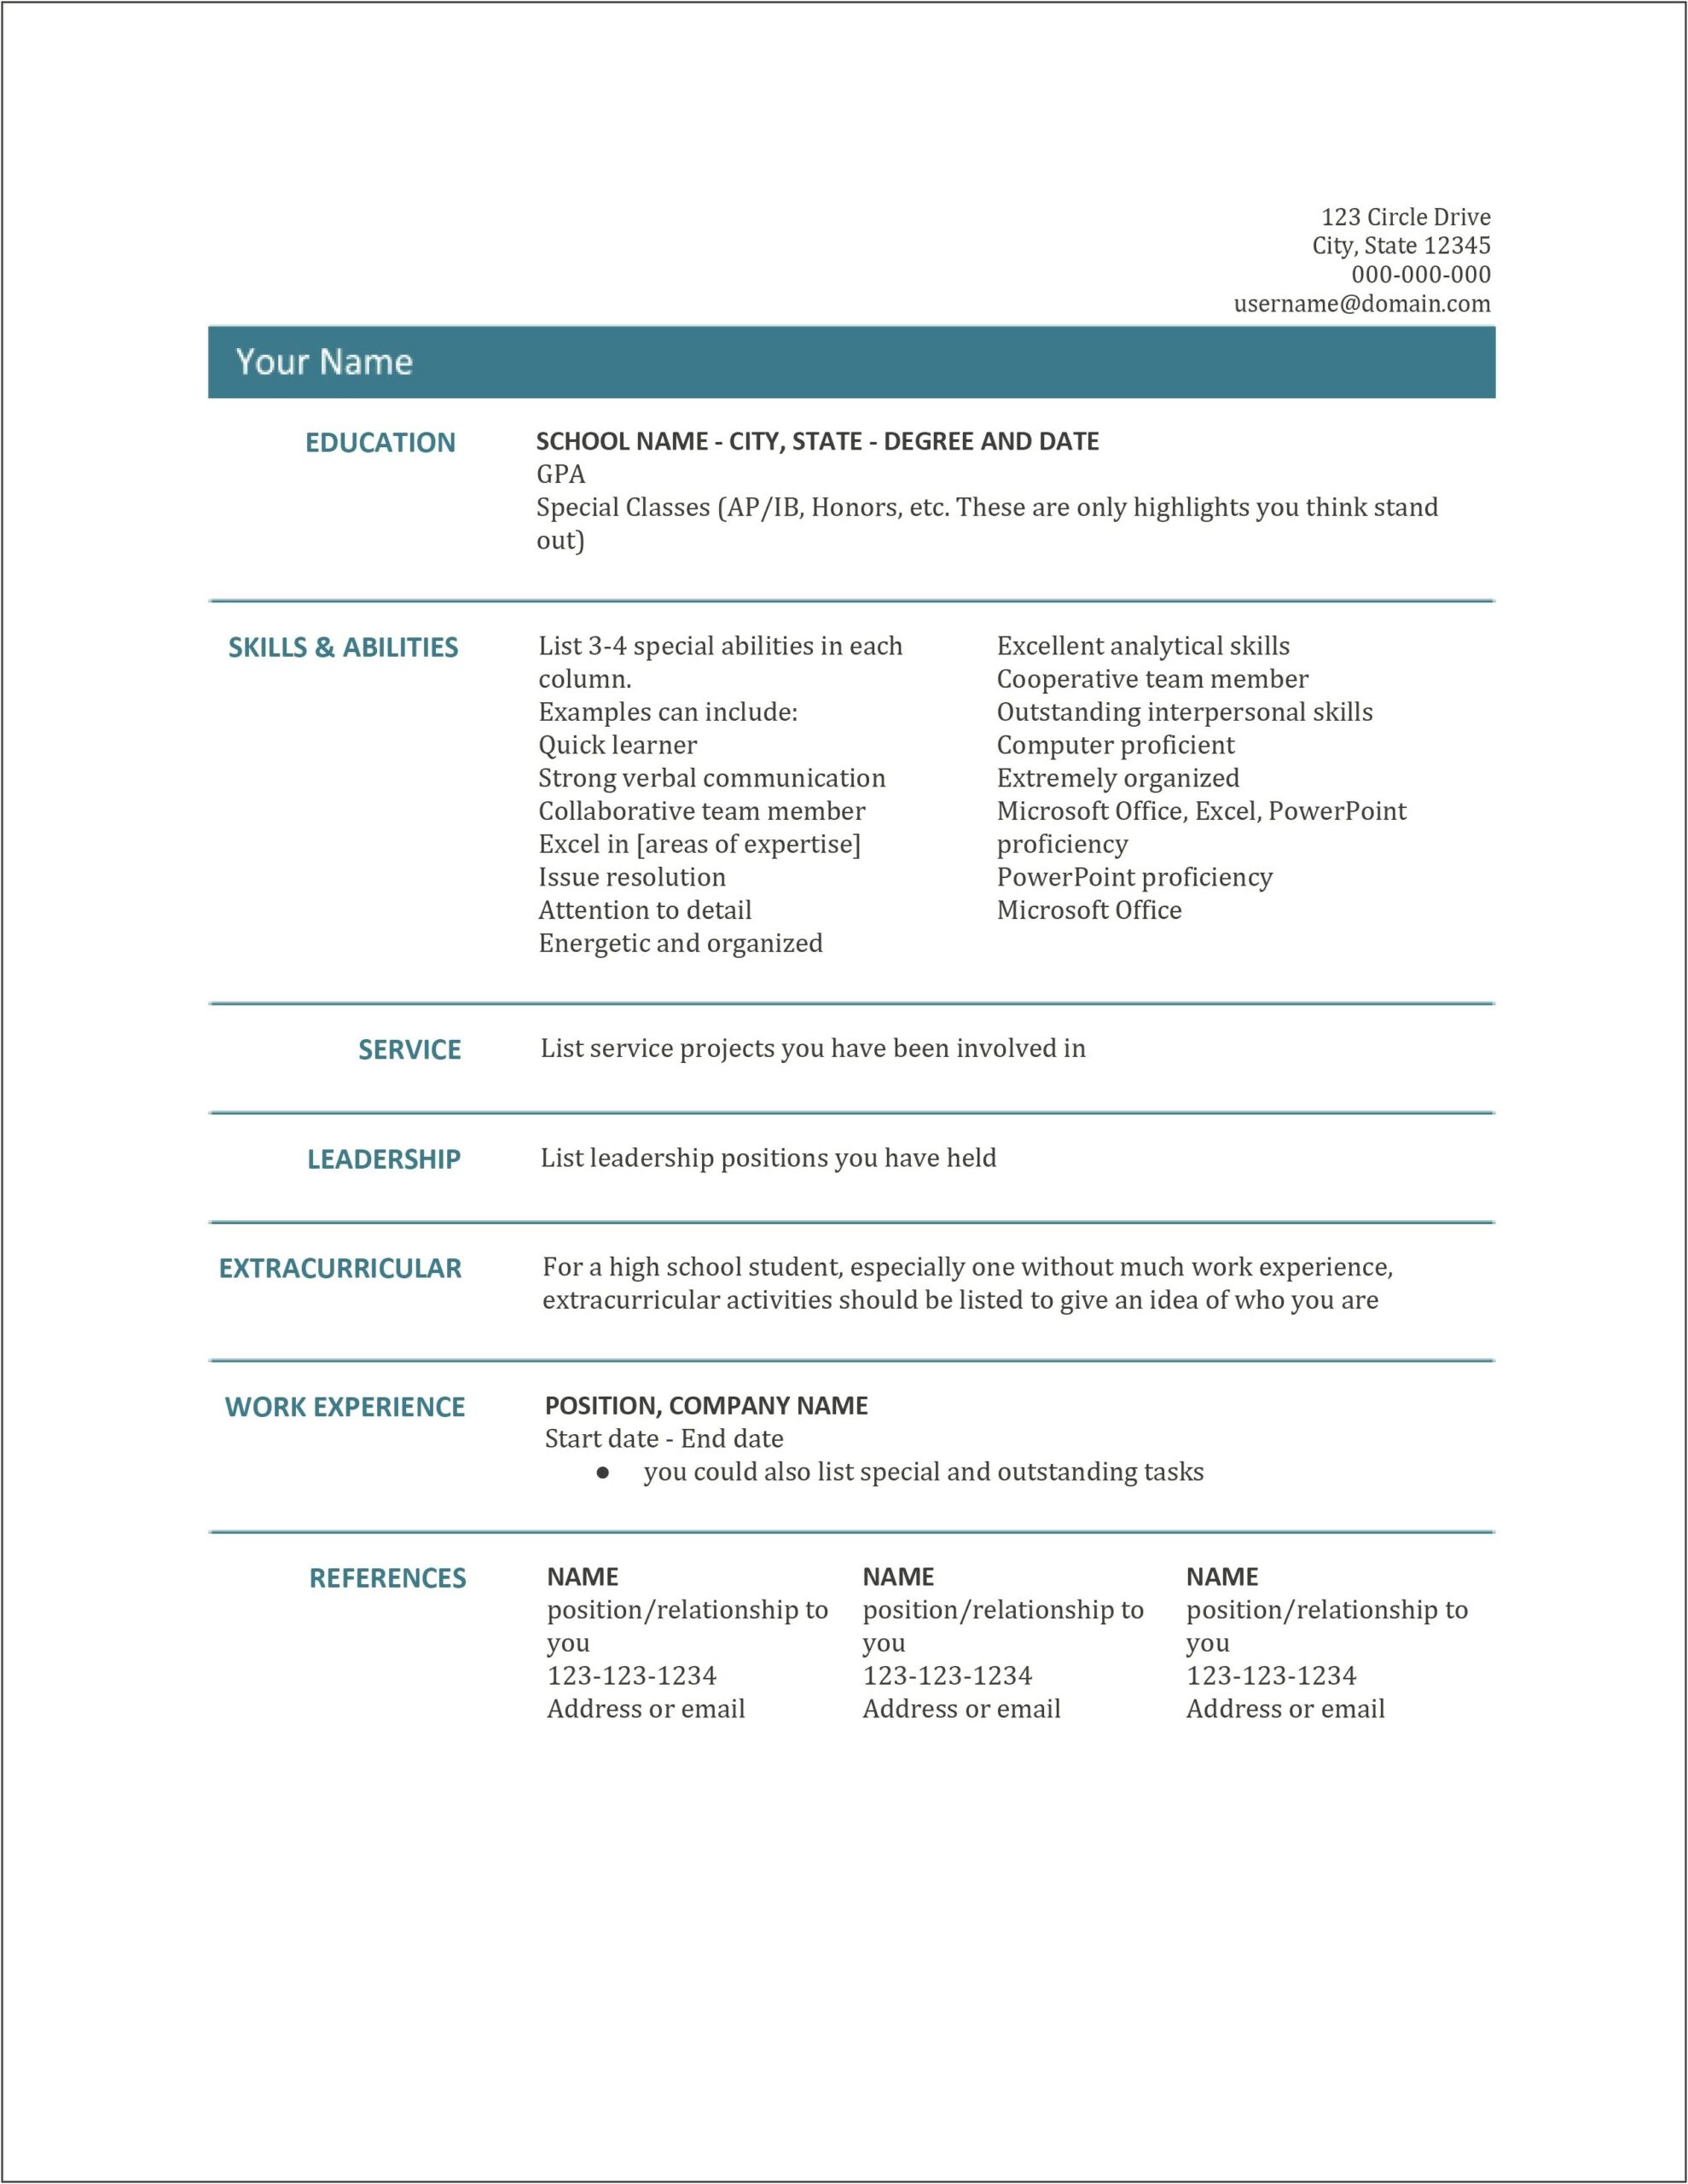 Resume Example Of Proficiency With Ms Word